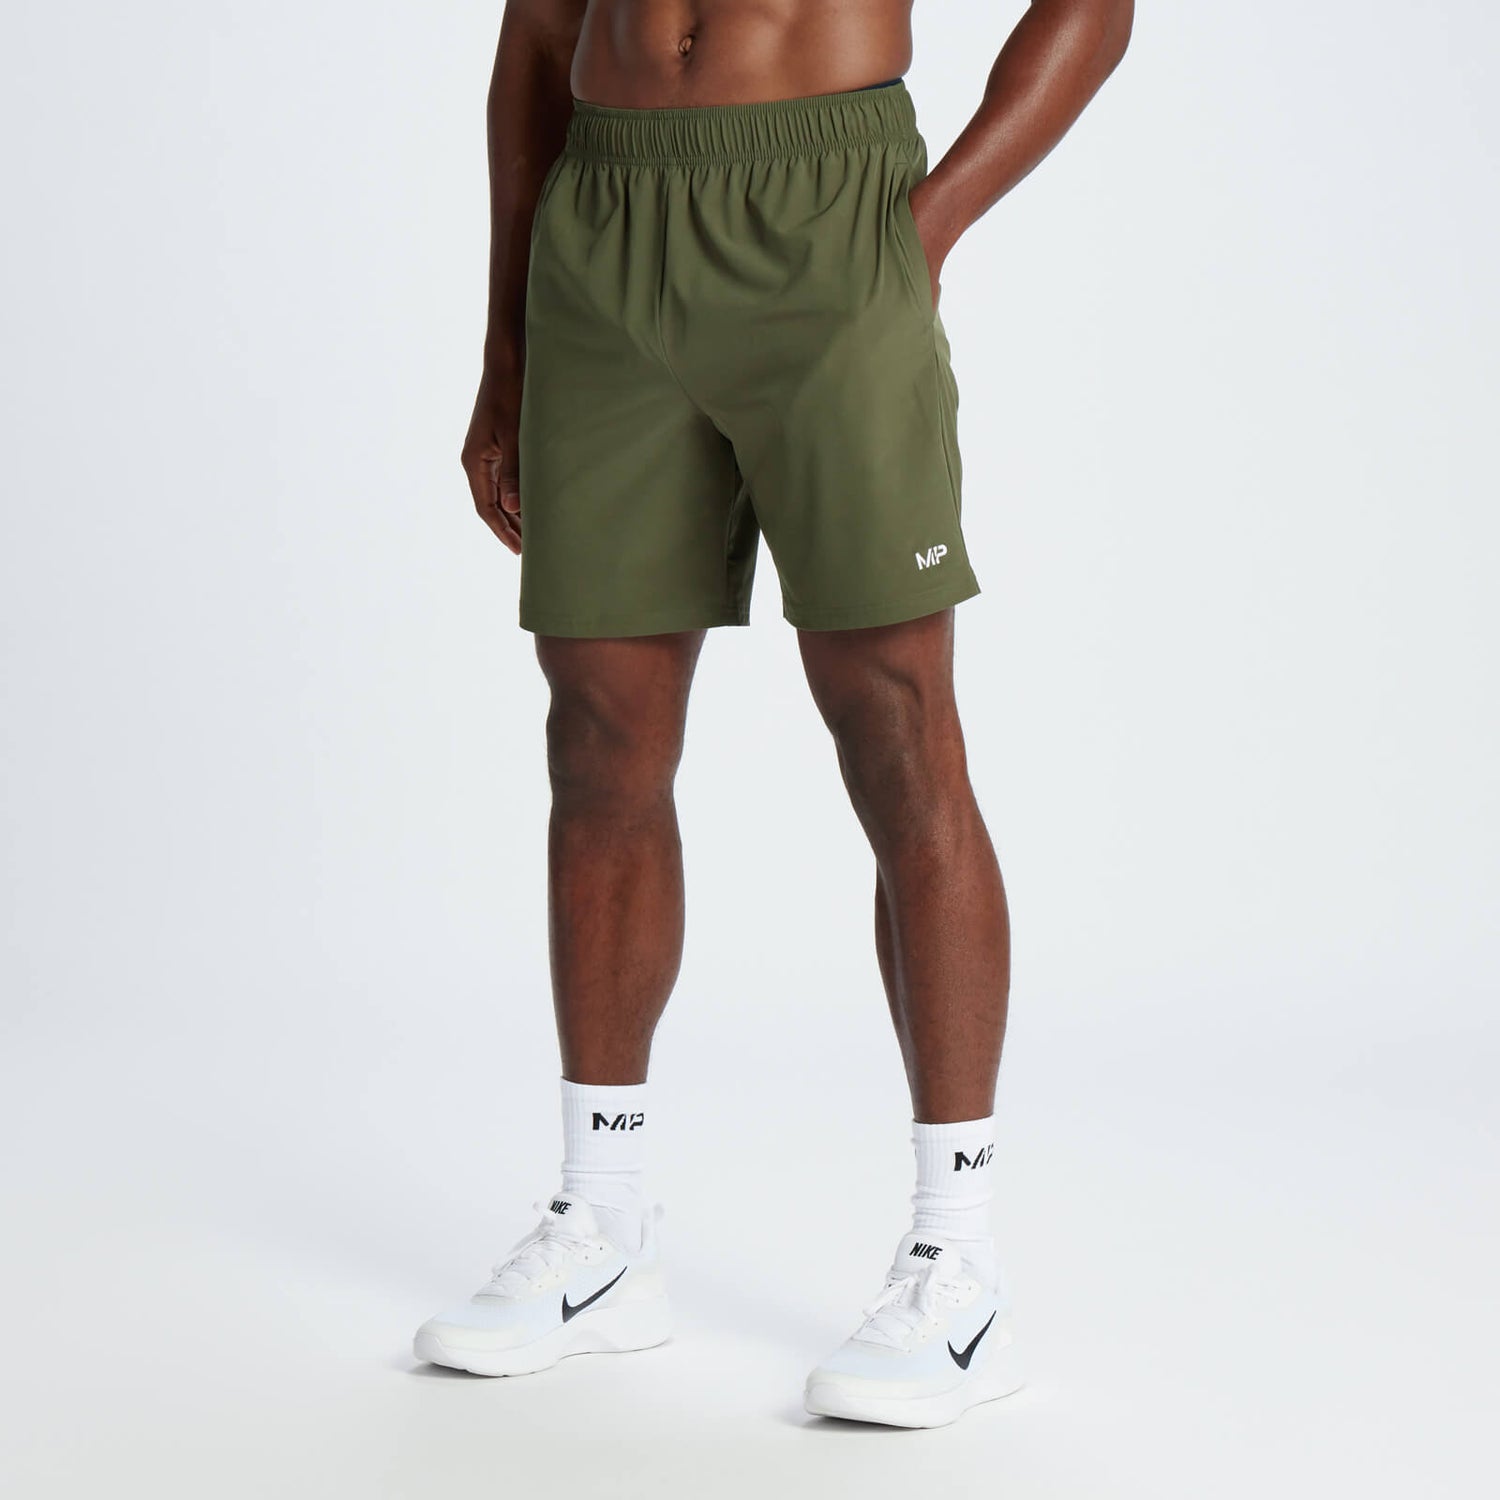 MP Men's Woven Training Shorts - Olive Green | MYPROTEIN™